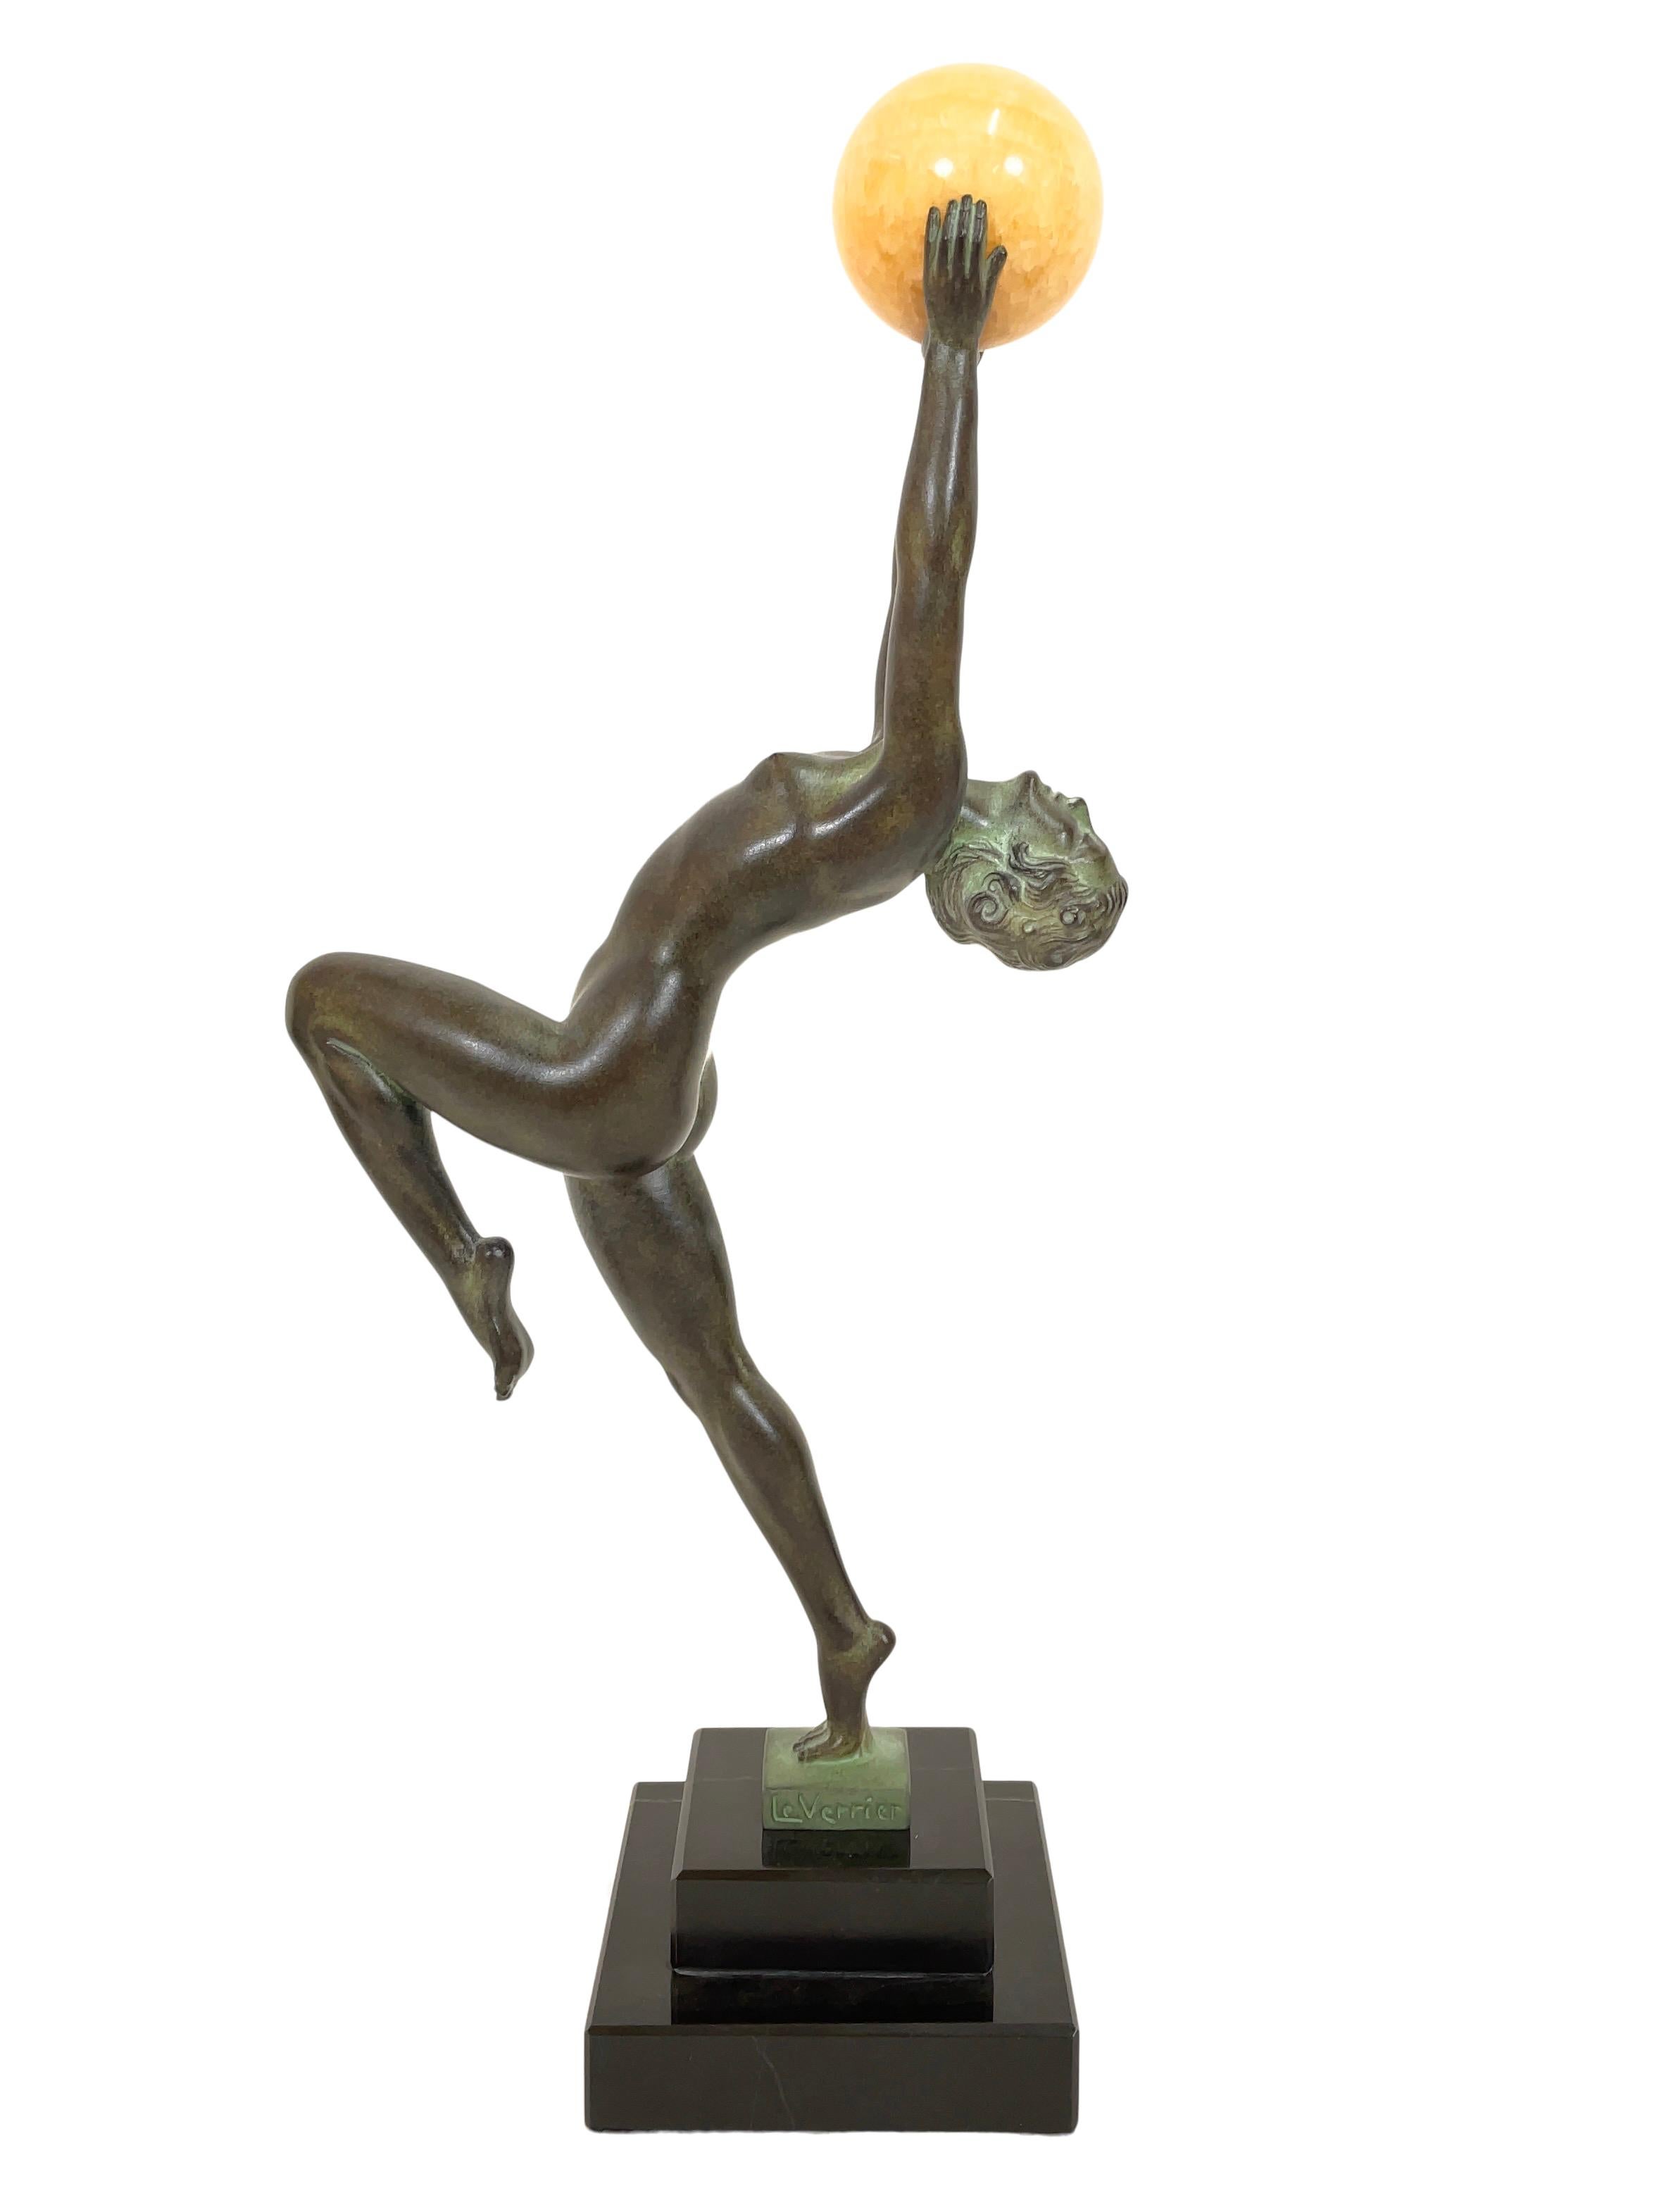 French Dancer Sculpture Jeu with a Jade Ball from Max Le Verrier in Art Deco Style